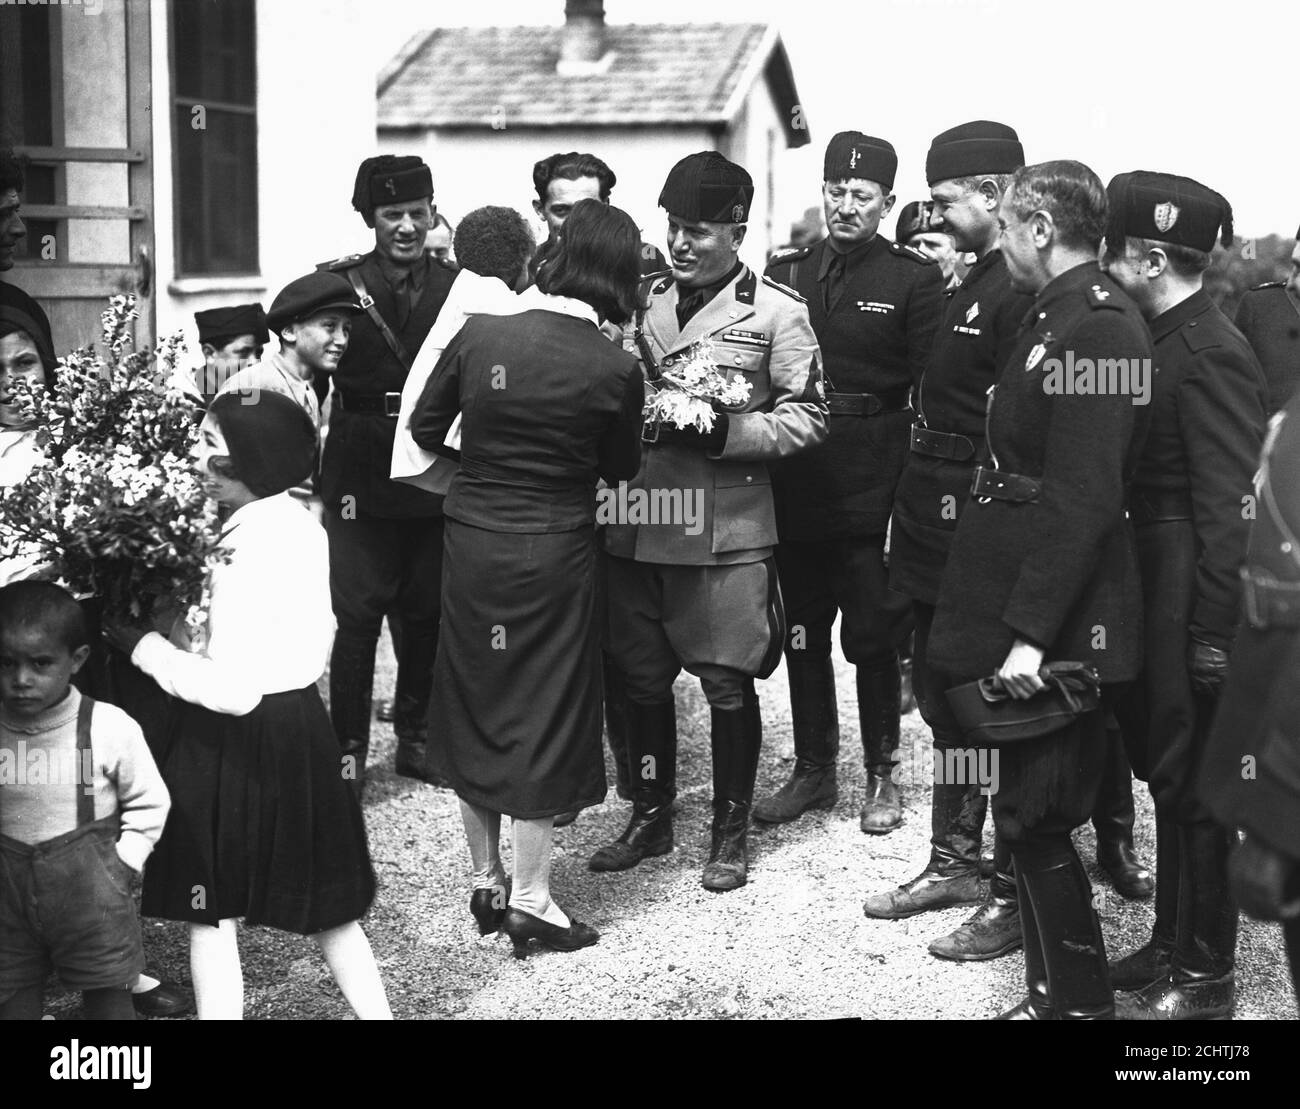 Agro Pontino campaign for Agricultural development in poor countries in Italy. Benito Mussolini given a flower gift from teachers in a children school, 1936. Stock Photo